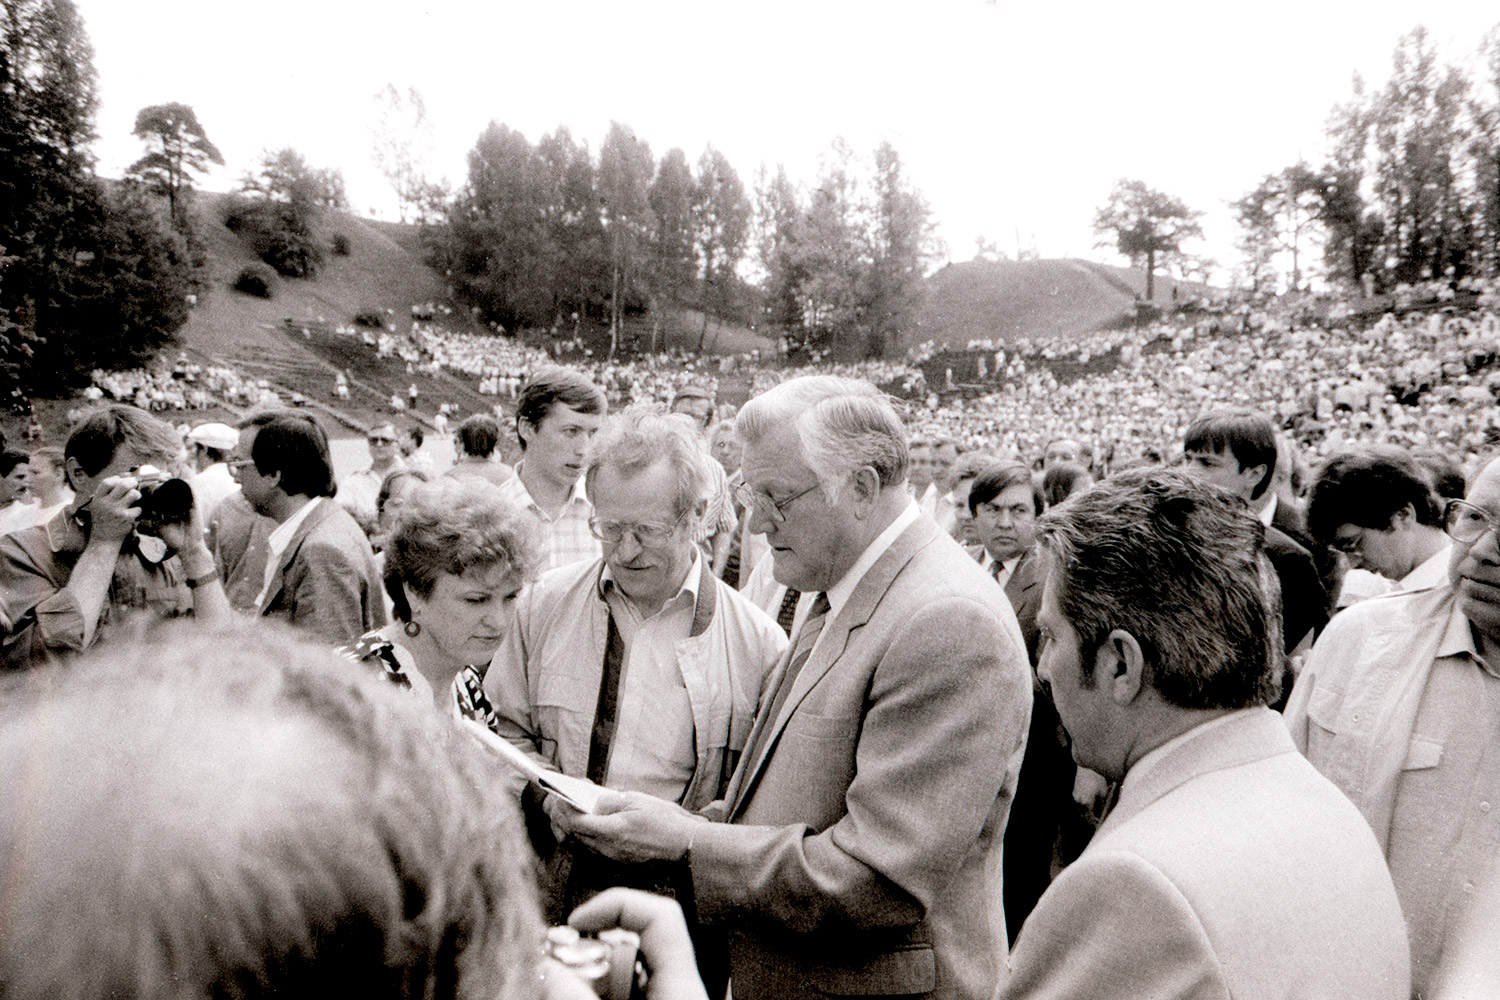 24/05/1989 – Lithuanian delegates escort in Kalnų Park to the Congress of People’s Deputies of the Soviet Union in Moscow. First Secretary of the LCP Central Committee: Algirdas Brazauskas. LVCA, photographer: V. Kapočius.